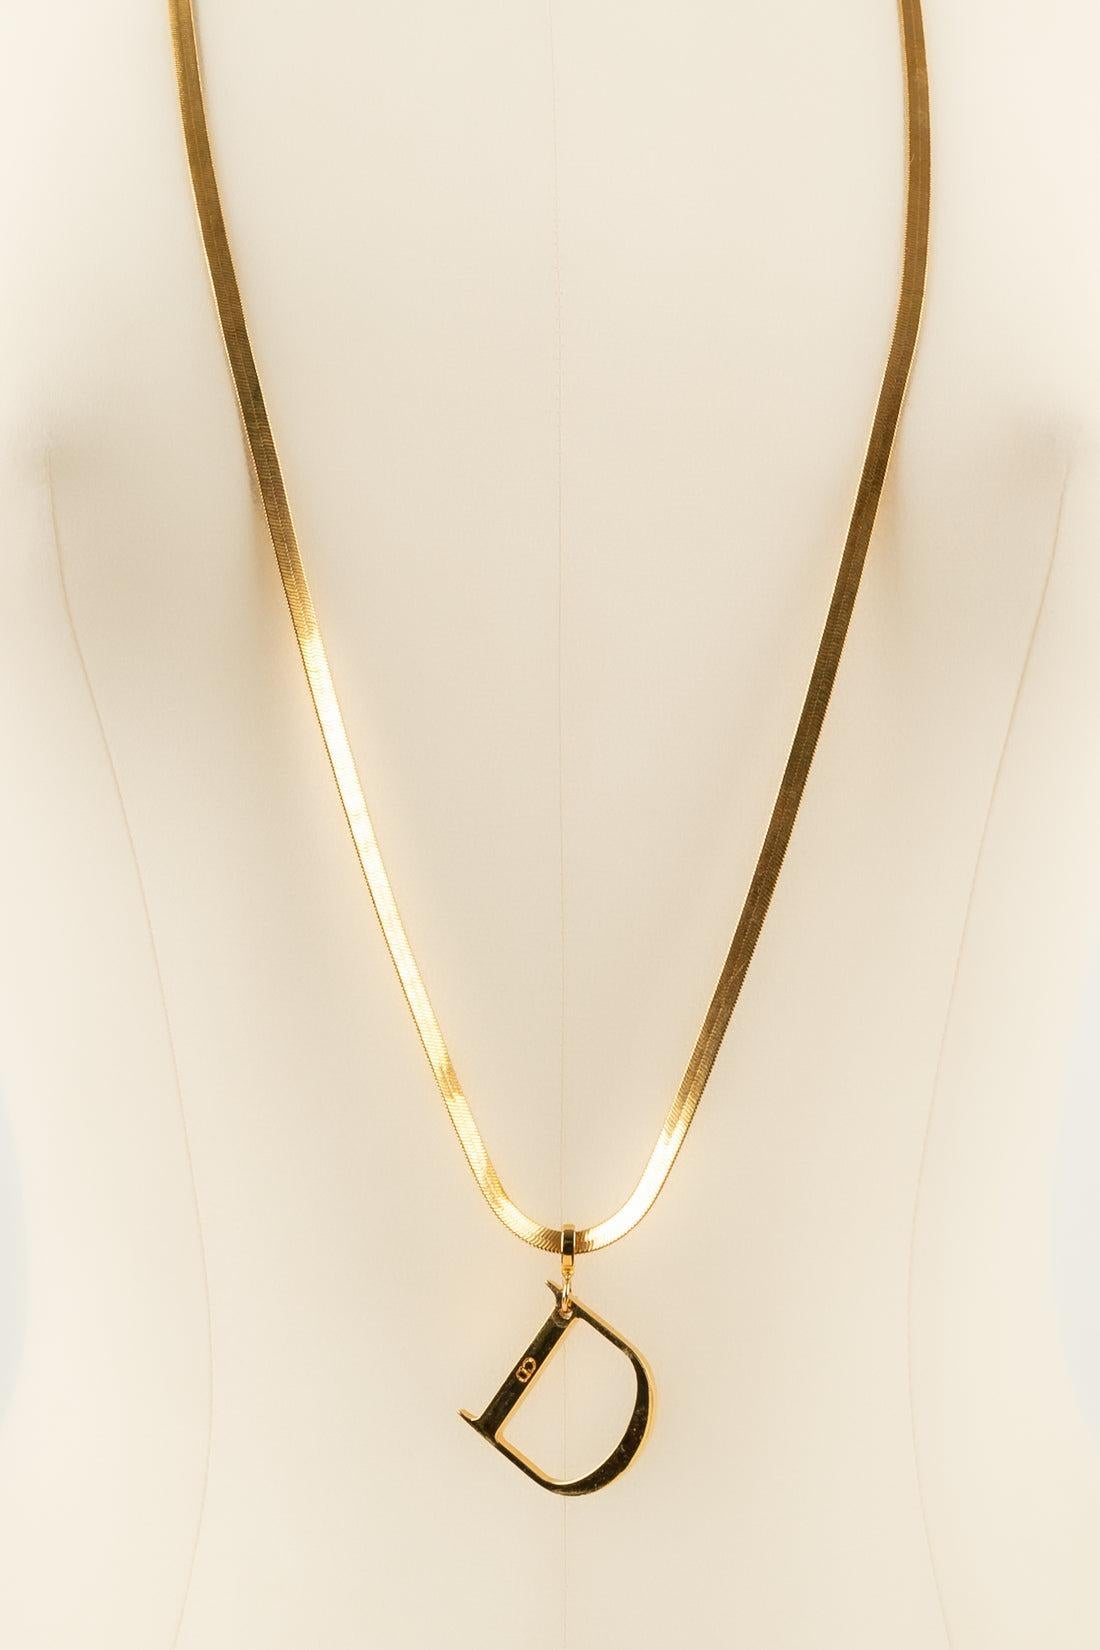 Christian Dior 3 Chain Rows Necklace in Gold-Plated Metal In Excellent Condition For Sale In SAINT-OUEN-SUR-SEINE, FR